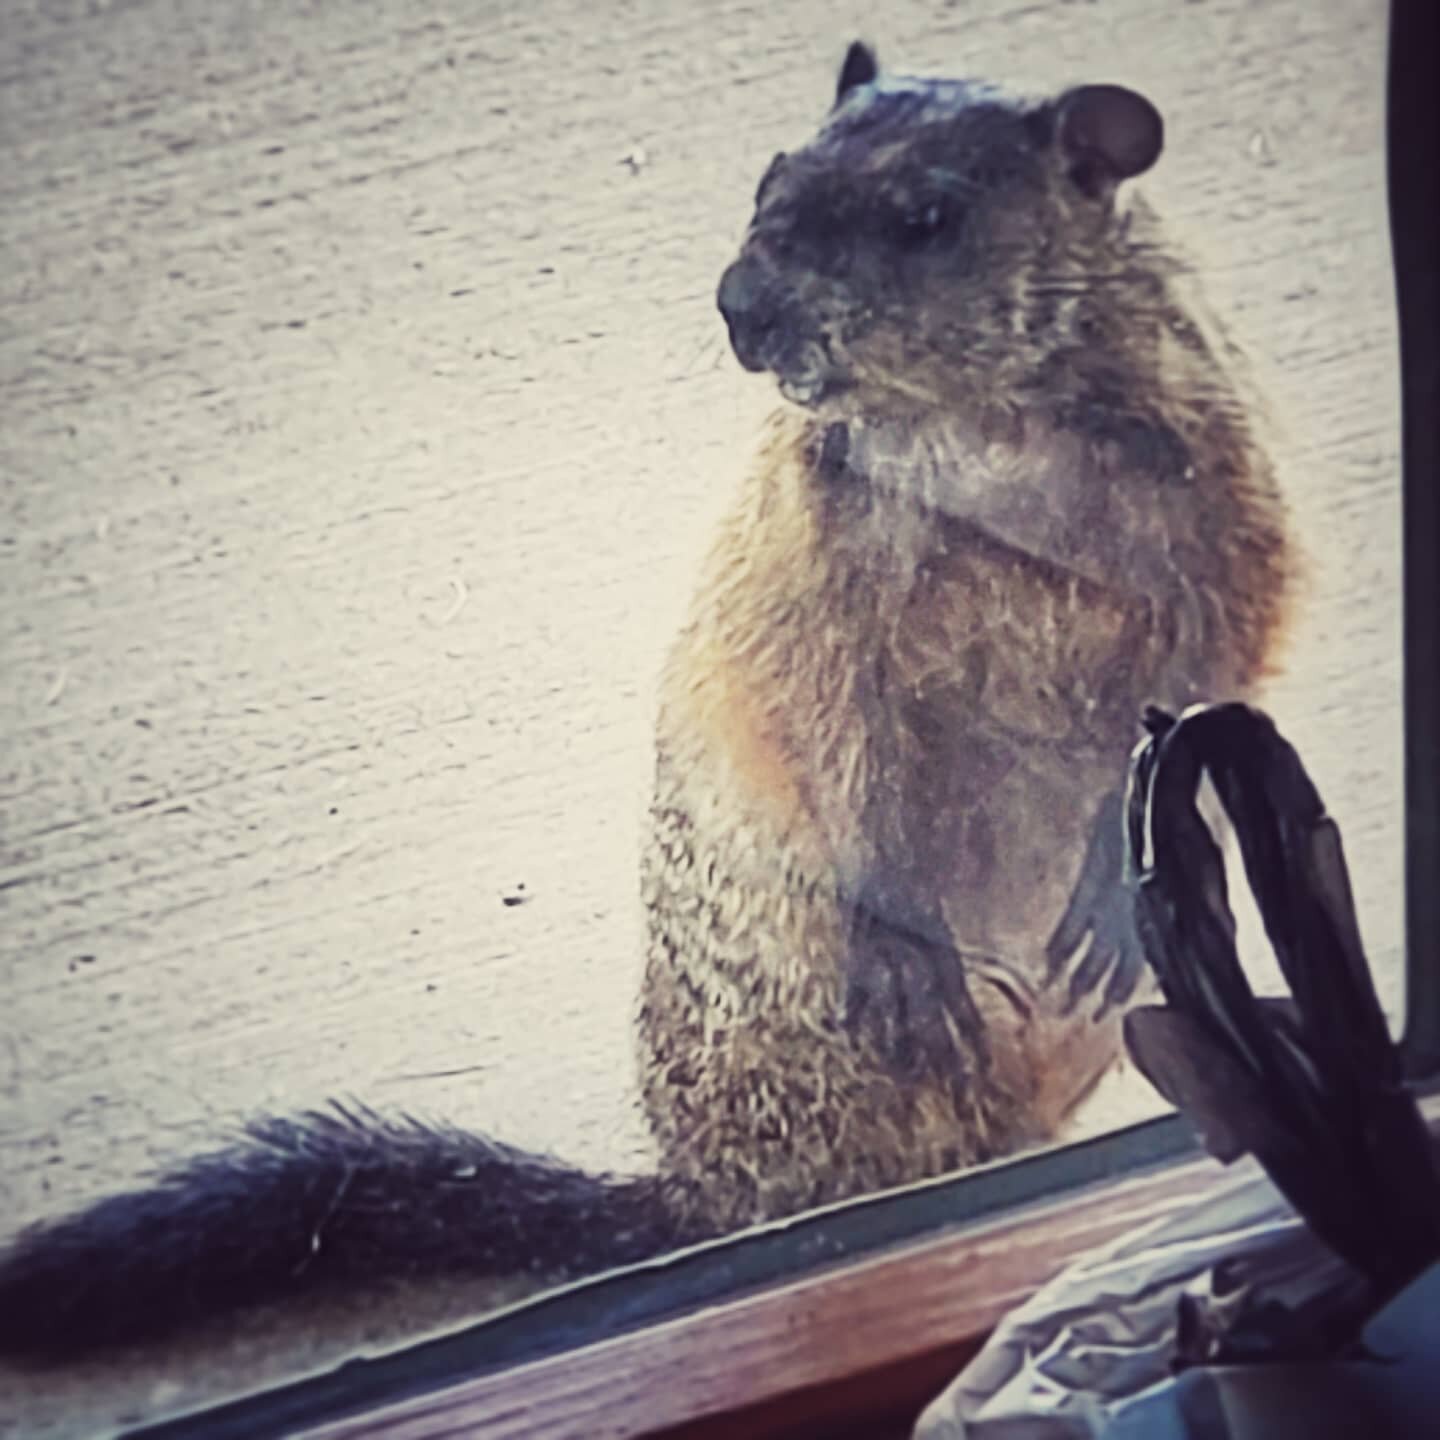 This guy visited me at work this week. I'm sure someone won't be happy to see him but I think he's cute. #unitedchurchofchrist #woodchuck #groundhog